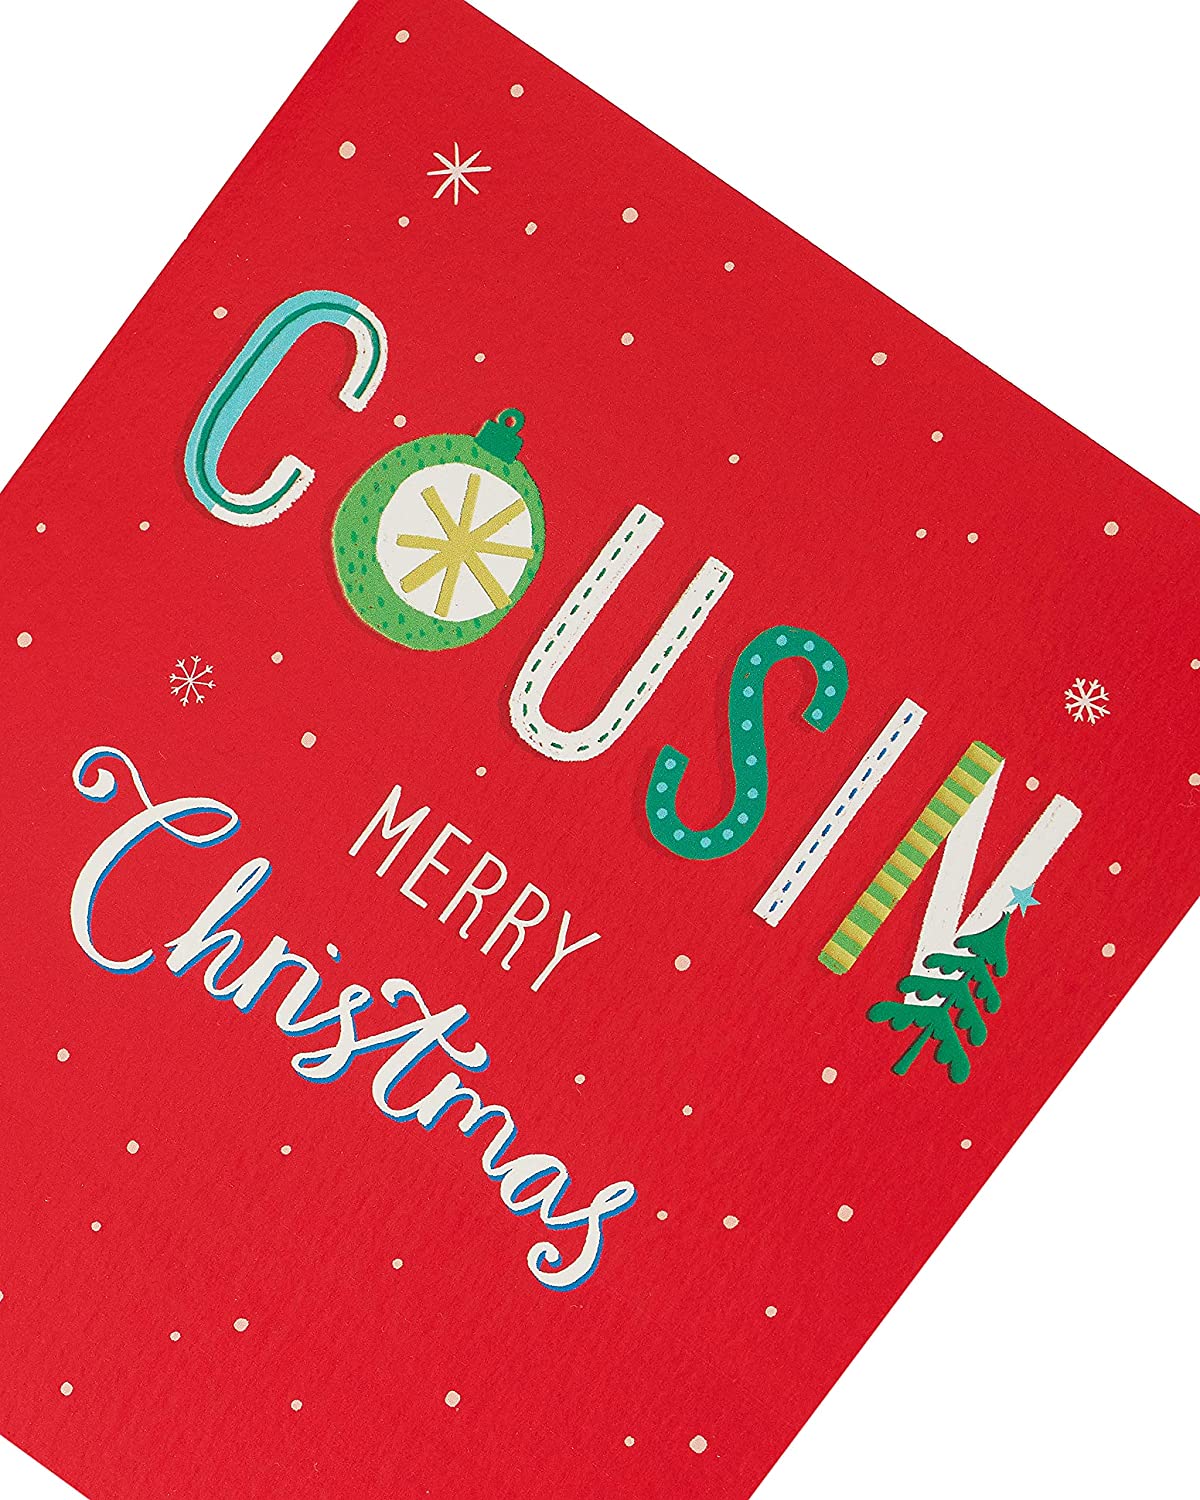 Cousin Christmas Card Bright Lettering 